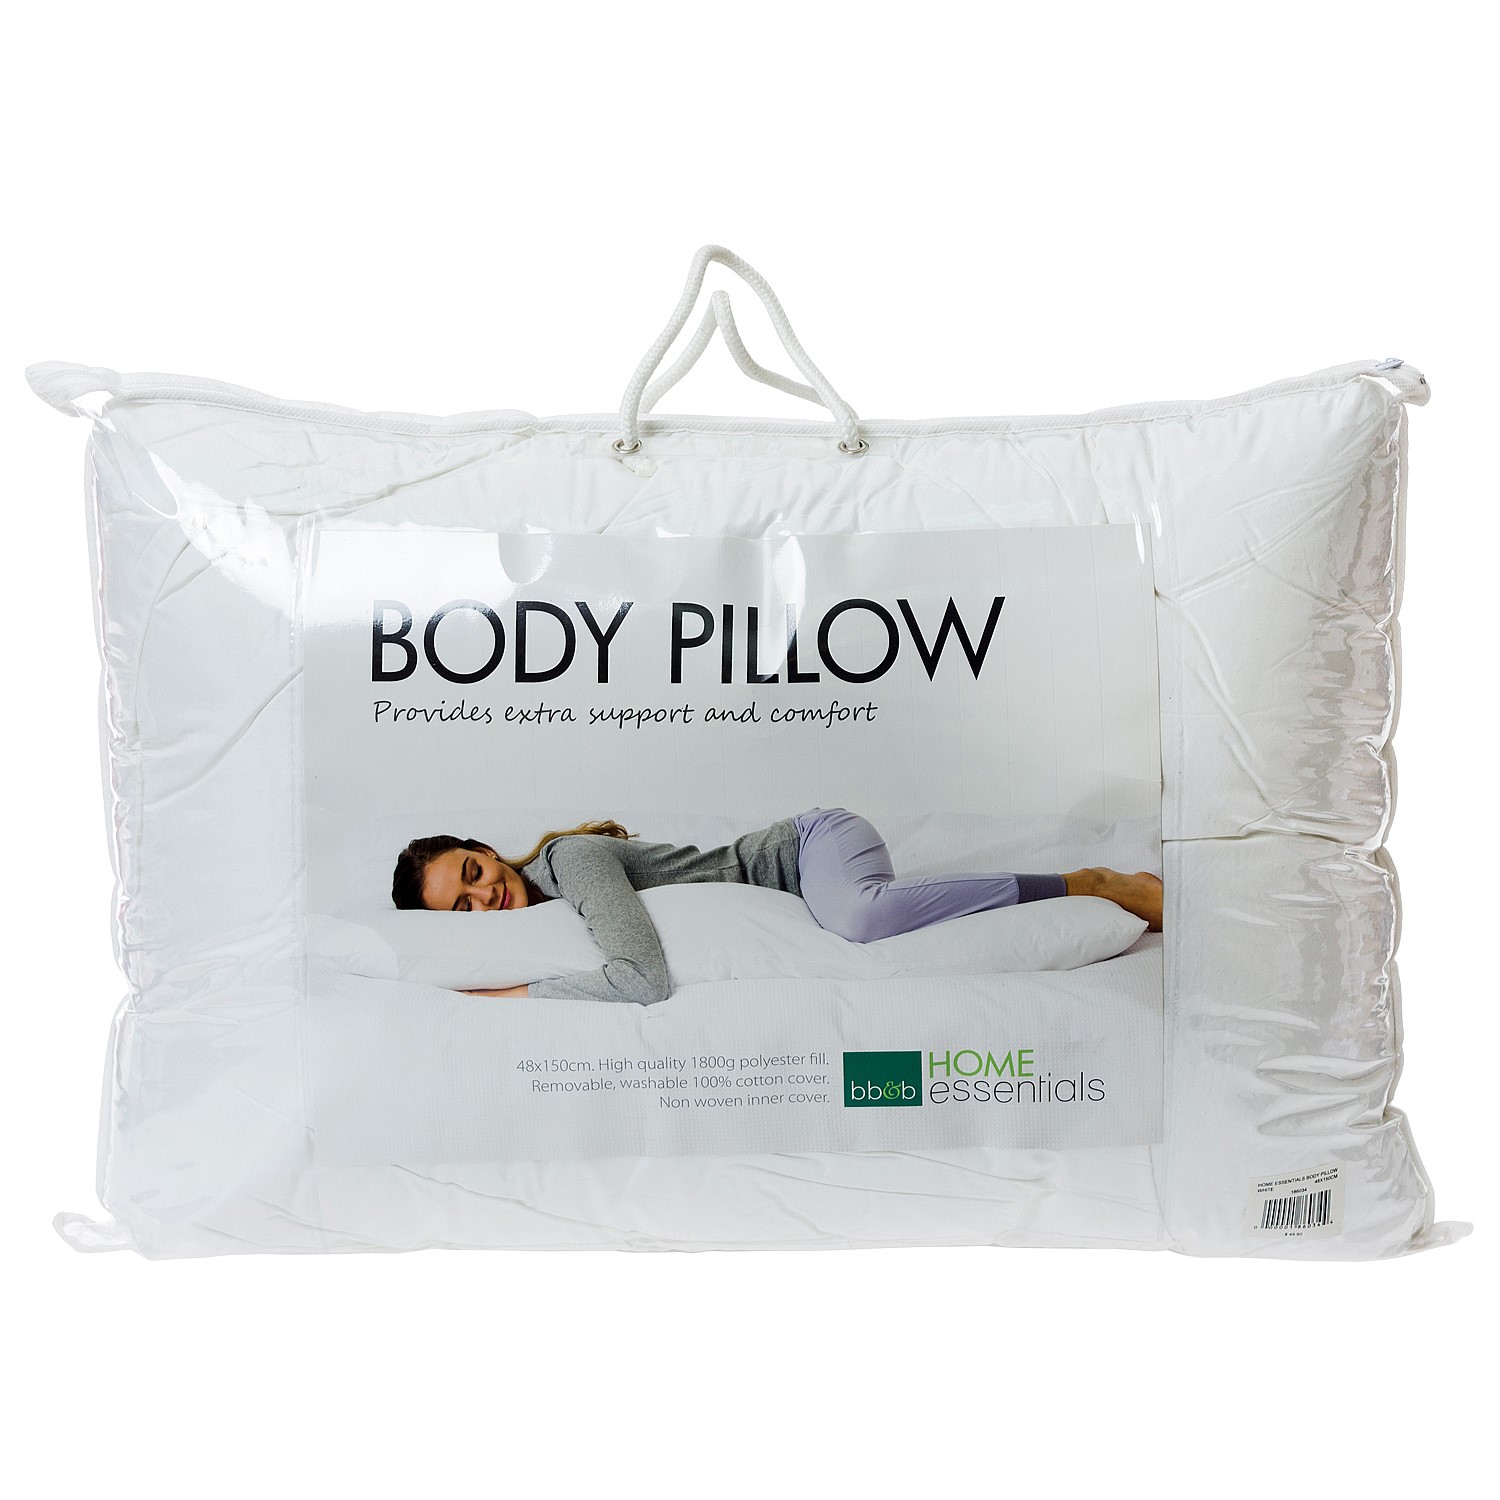 Body Pillow Covers Bed Bath And Beyond Bed With Built In Closet